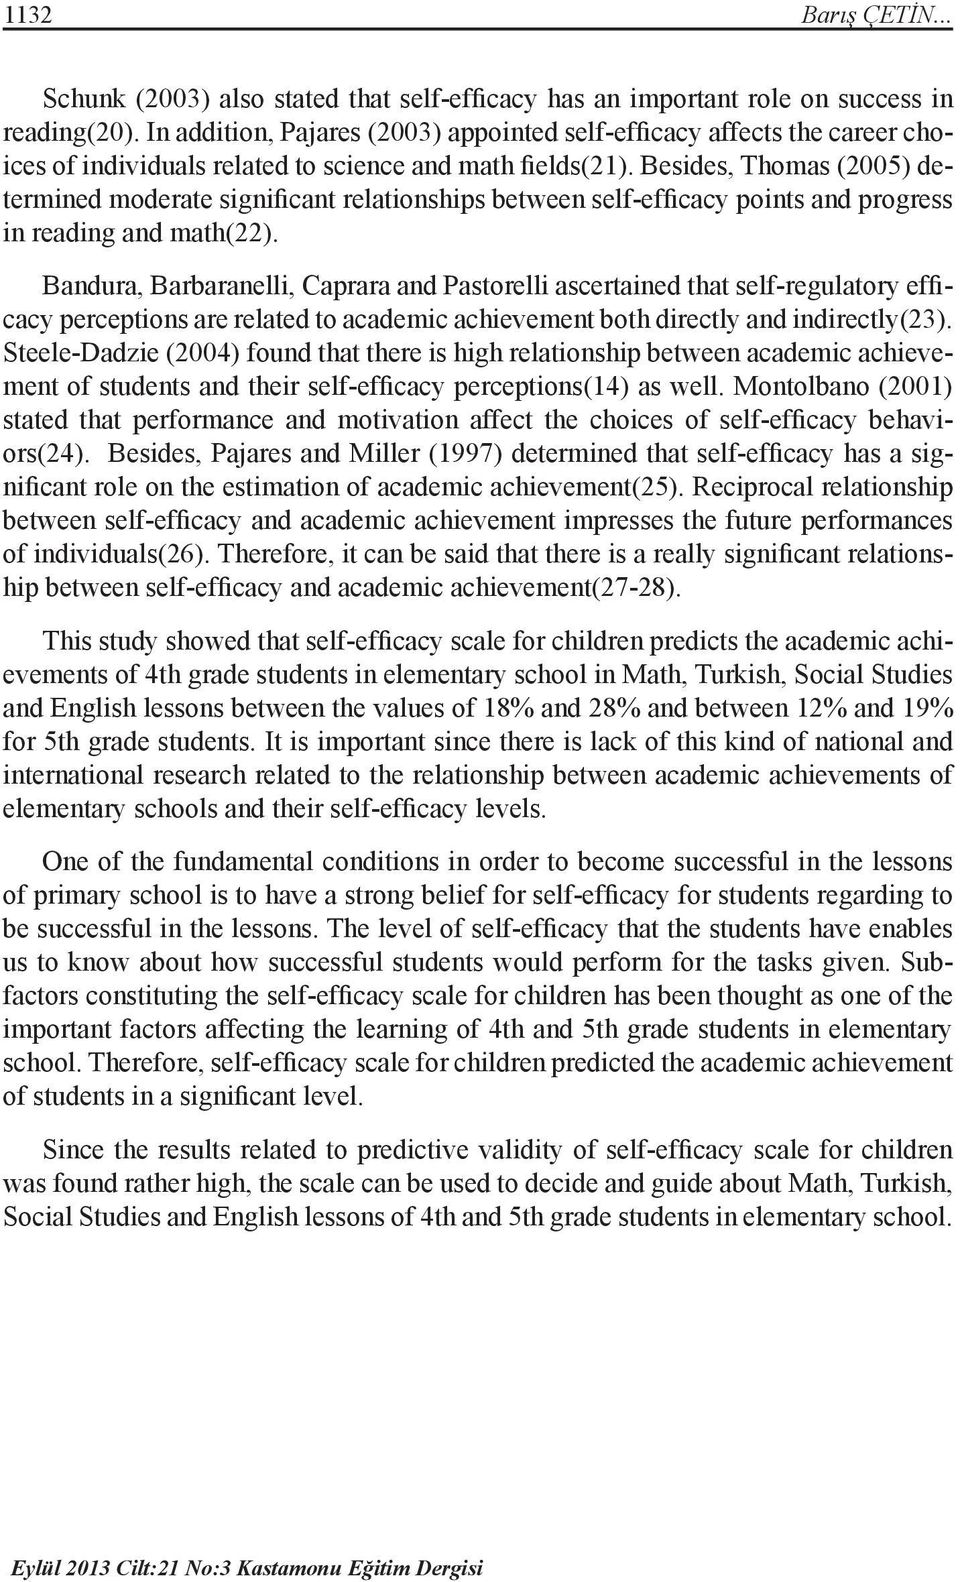 Besides, Thomas (2005) determined moderate significant relationships between self-efficacy points and progress in reading and math(22).